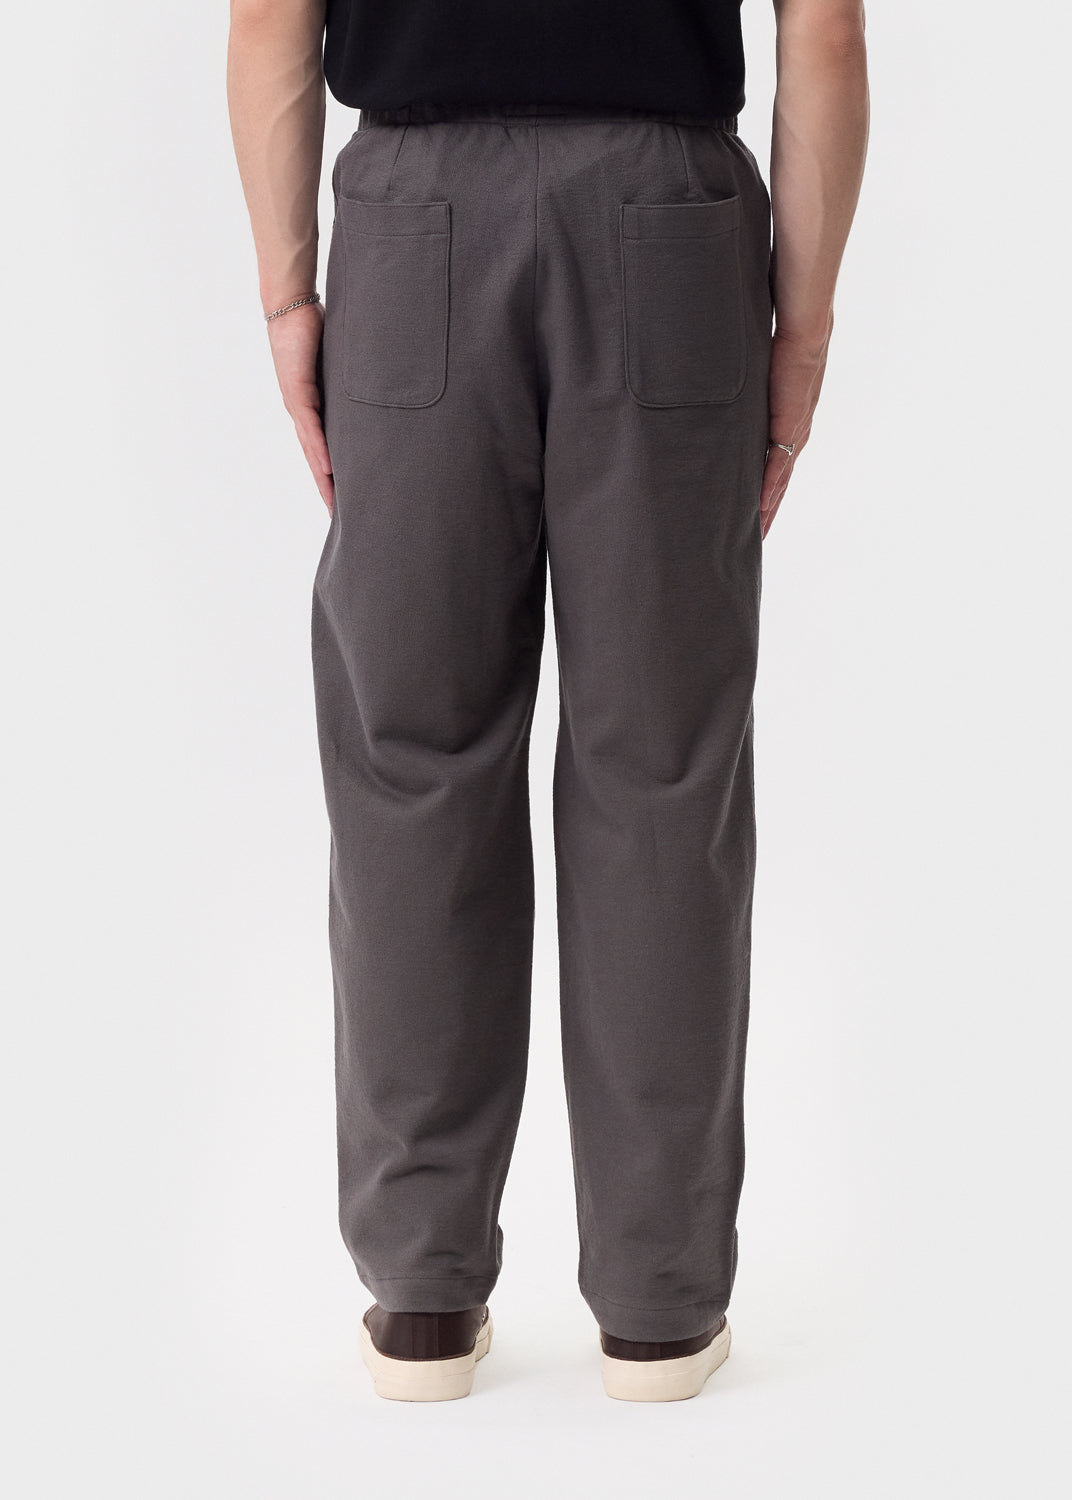 Lady White Co. - Grey Textured Lounge Pants | 1032 SPACE